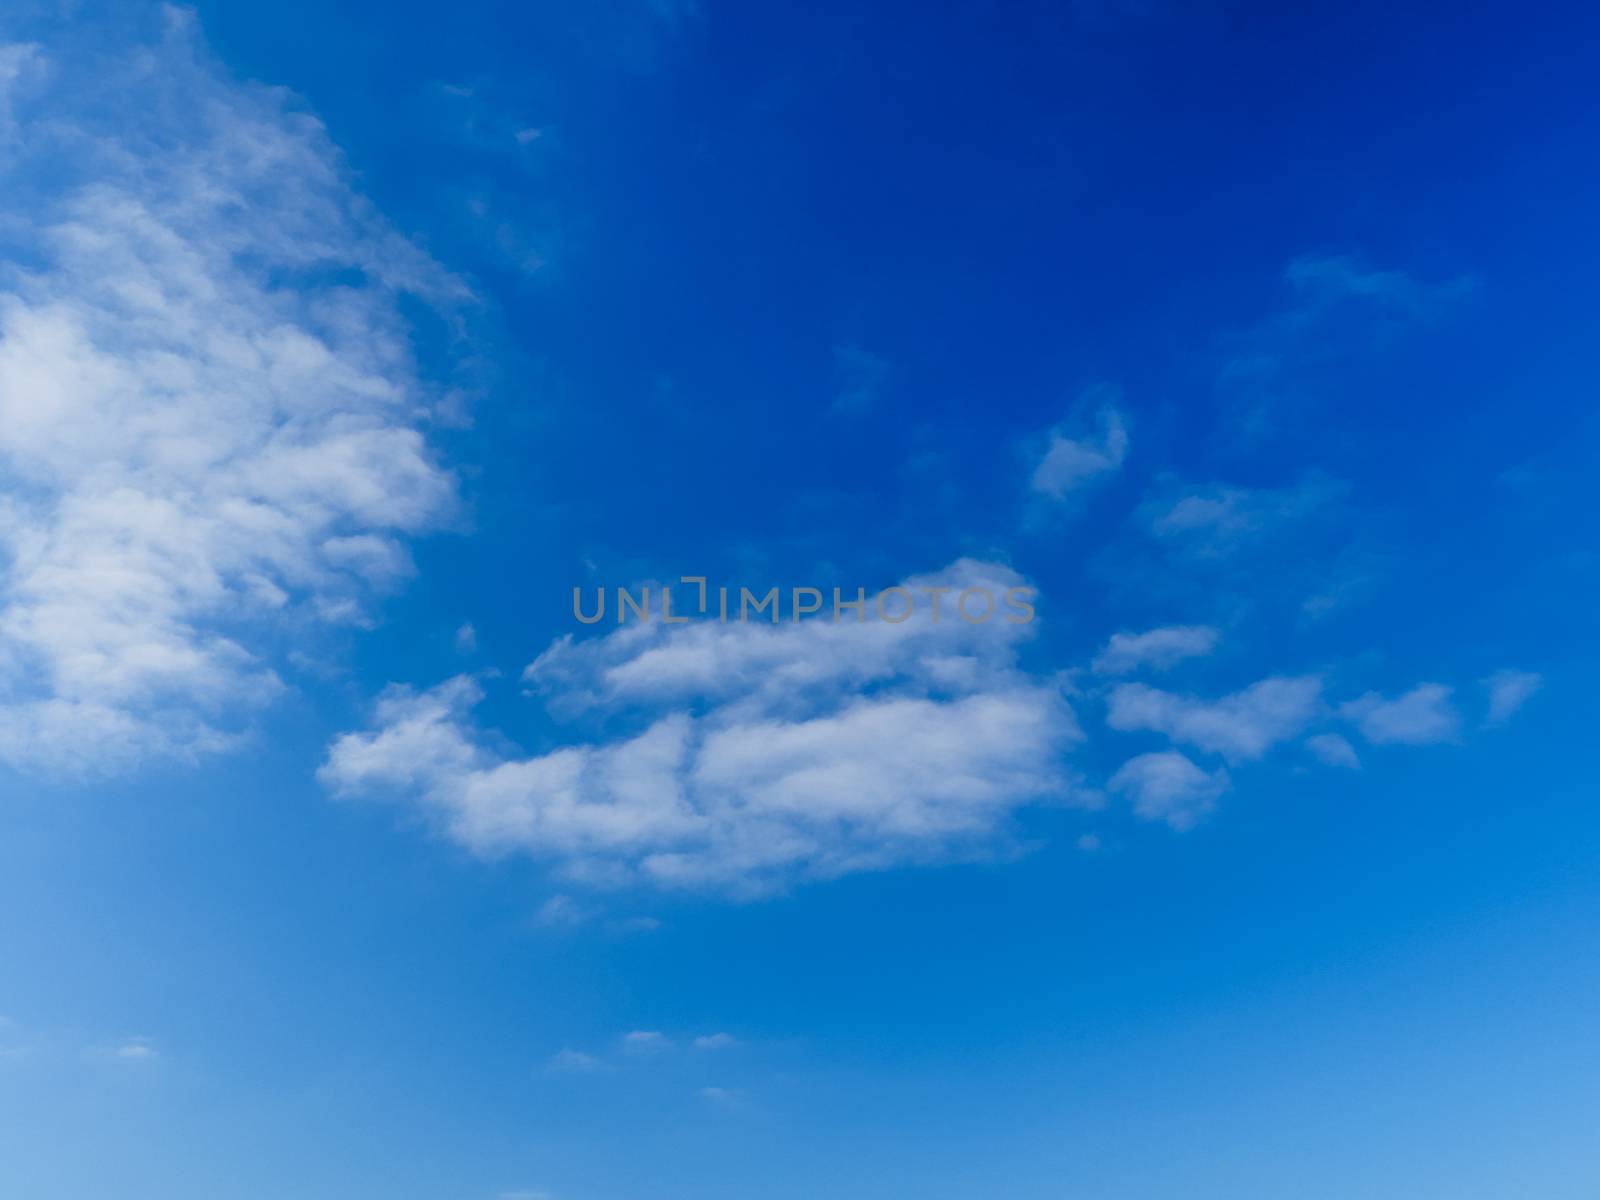 blue sky background with white puffy clouds 